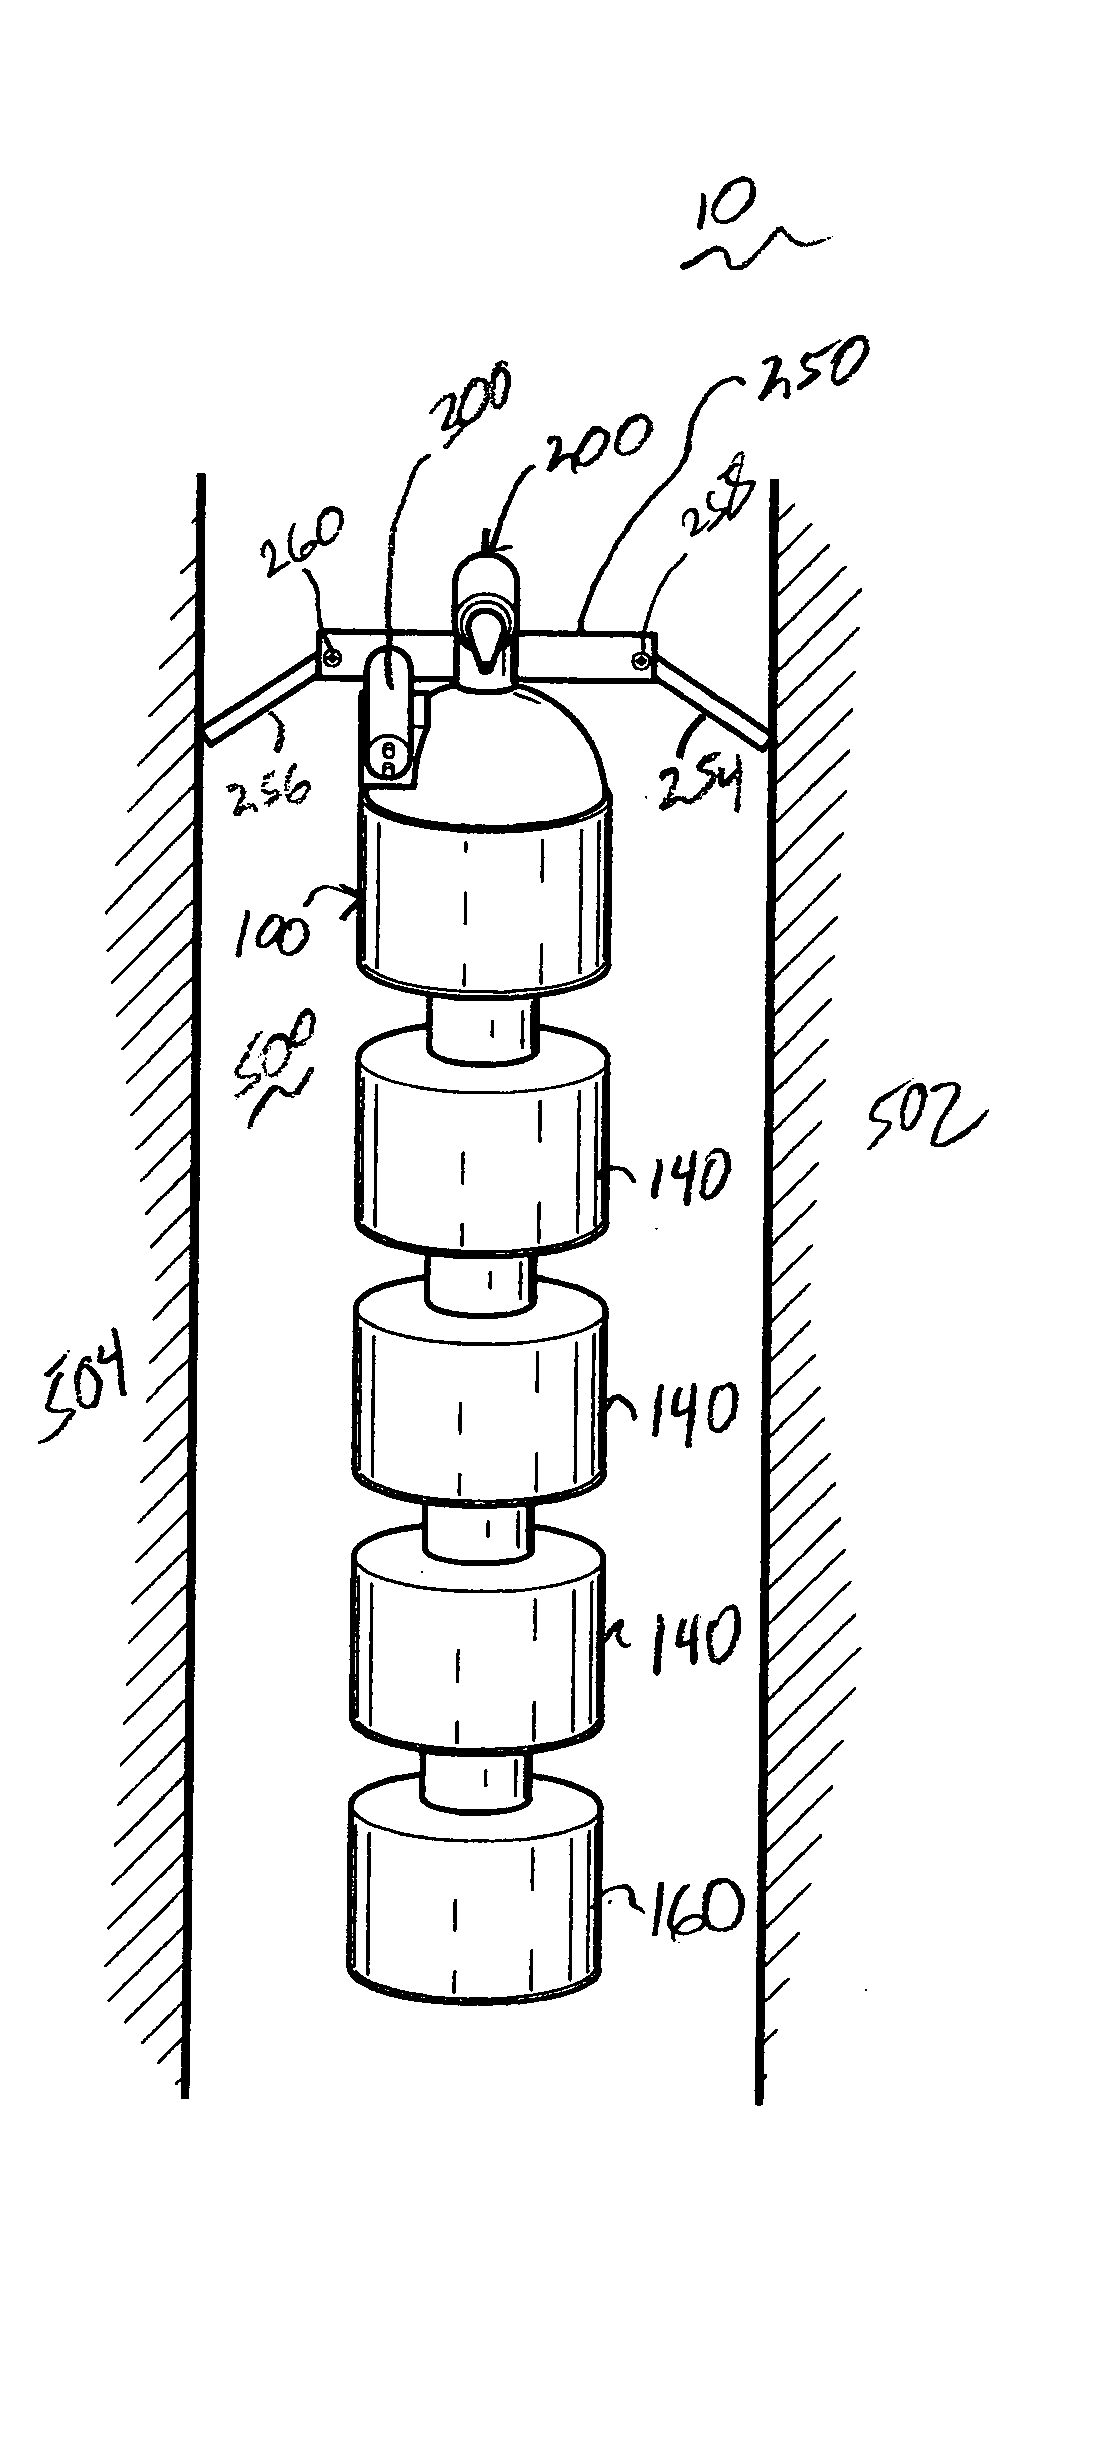 Self-contained automatic fire extinguisher